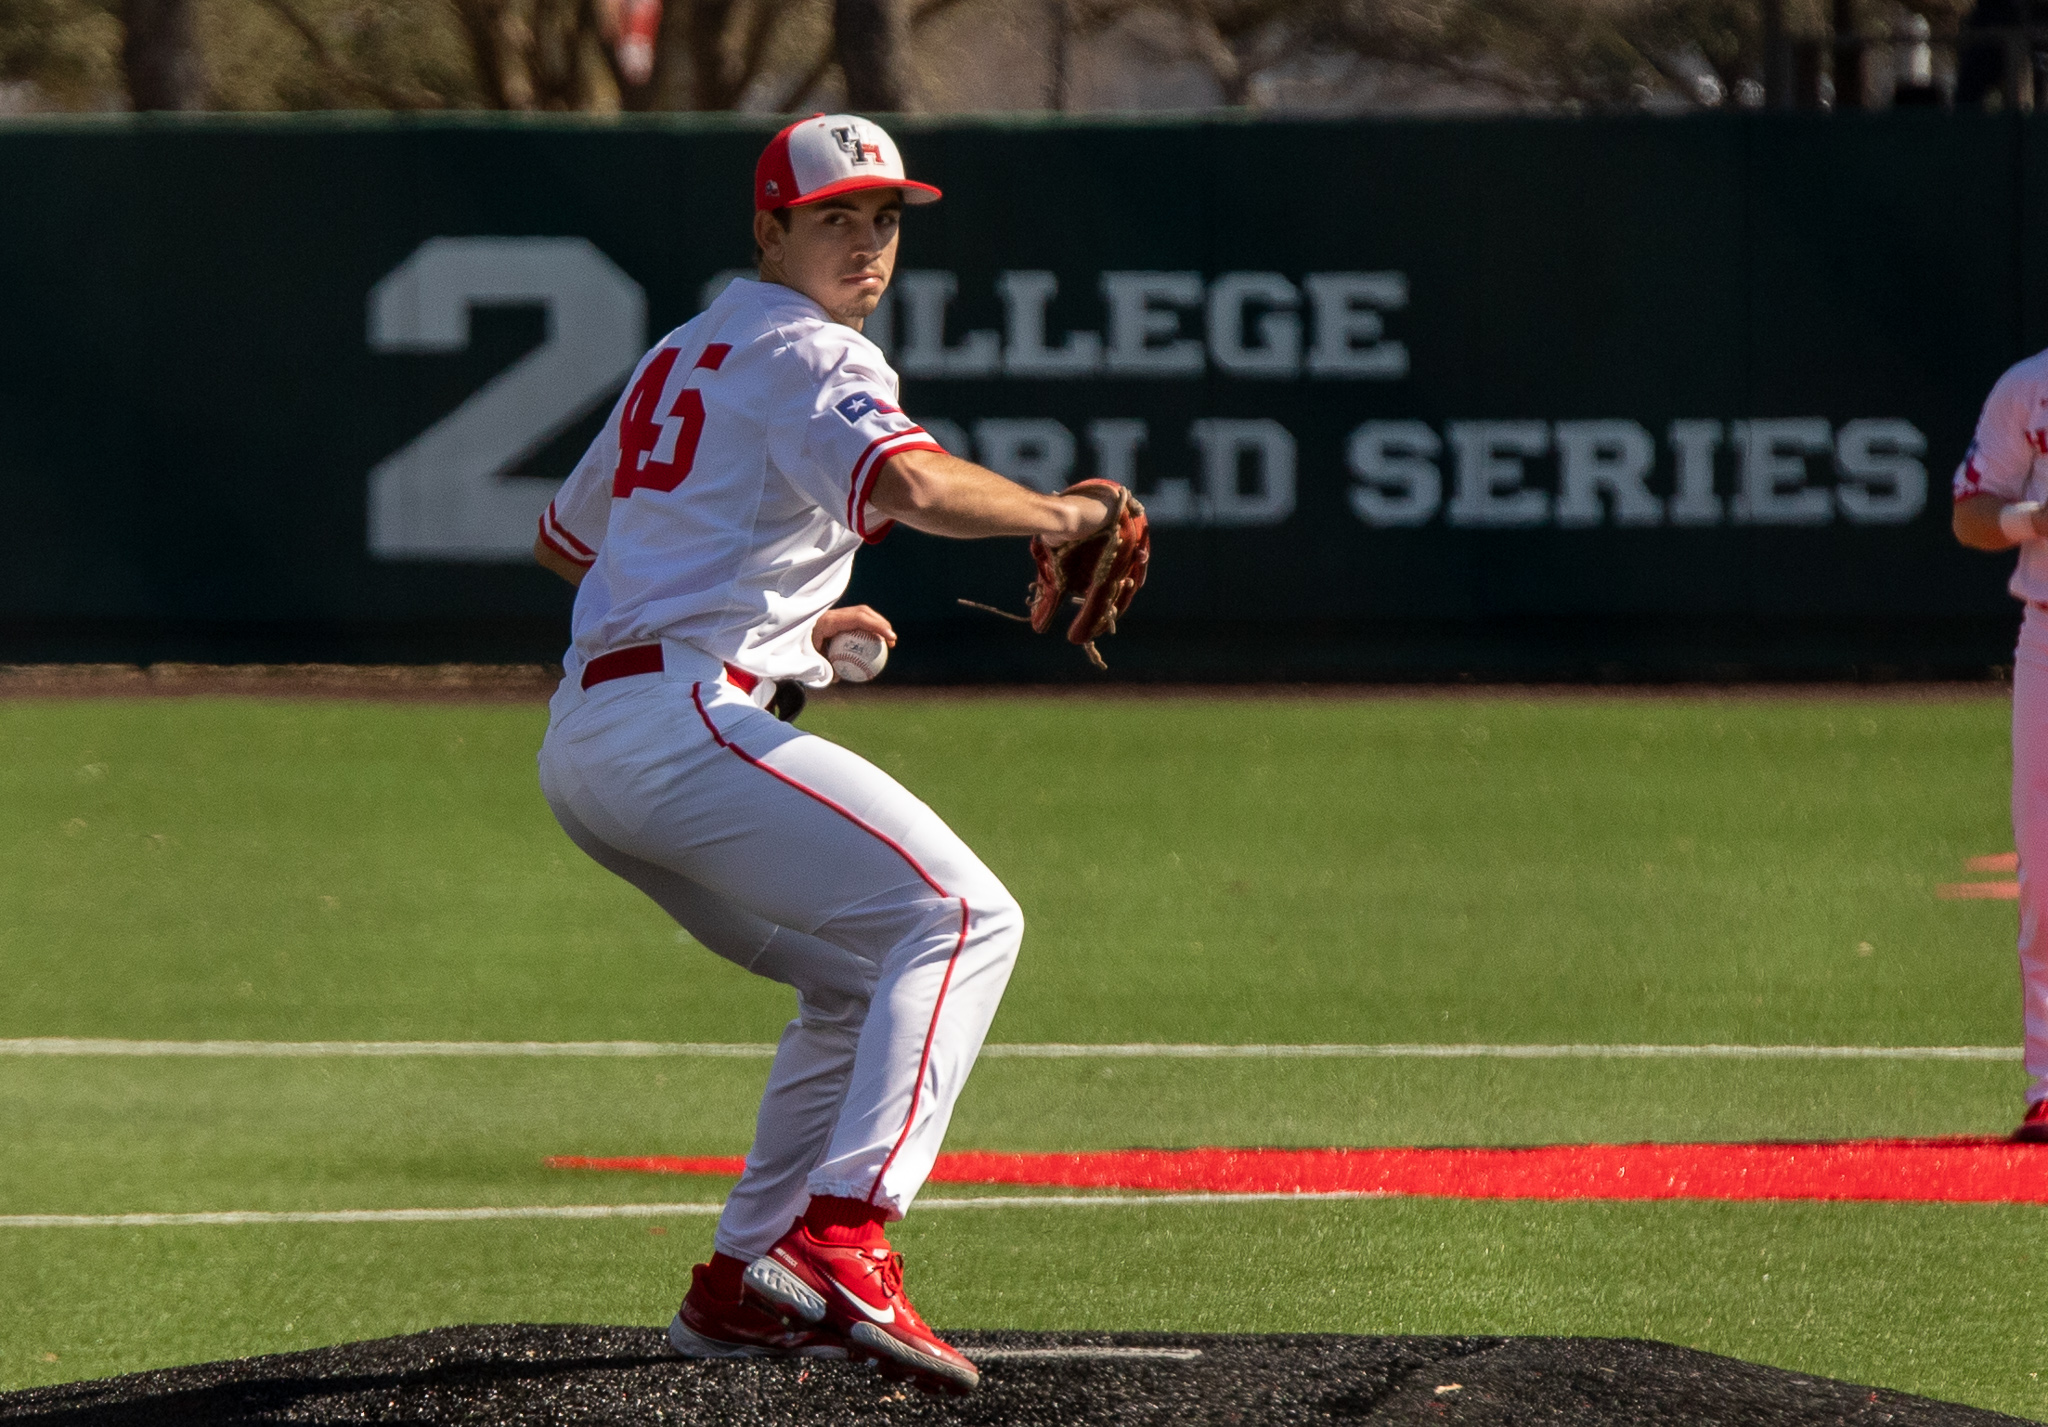 Robert Gasser has been the ace of UH baseball's rotation in 2021, posting a 2.19 ERA and striking out over seven batters a game. | Andy Yanez/The Cougar